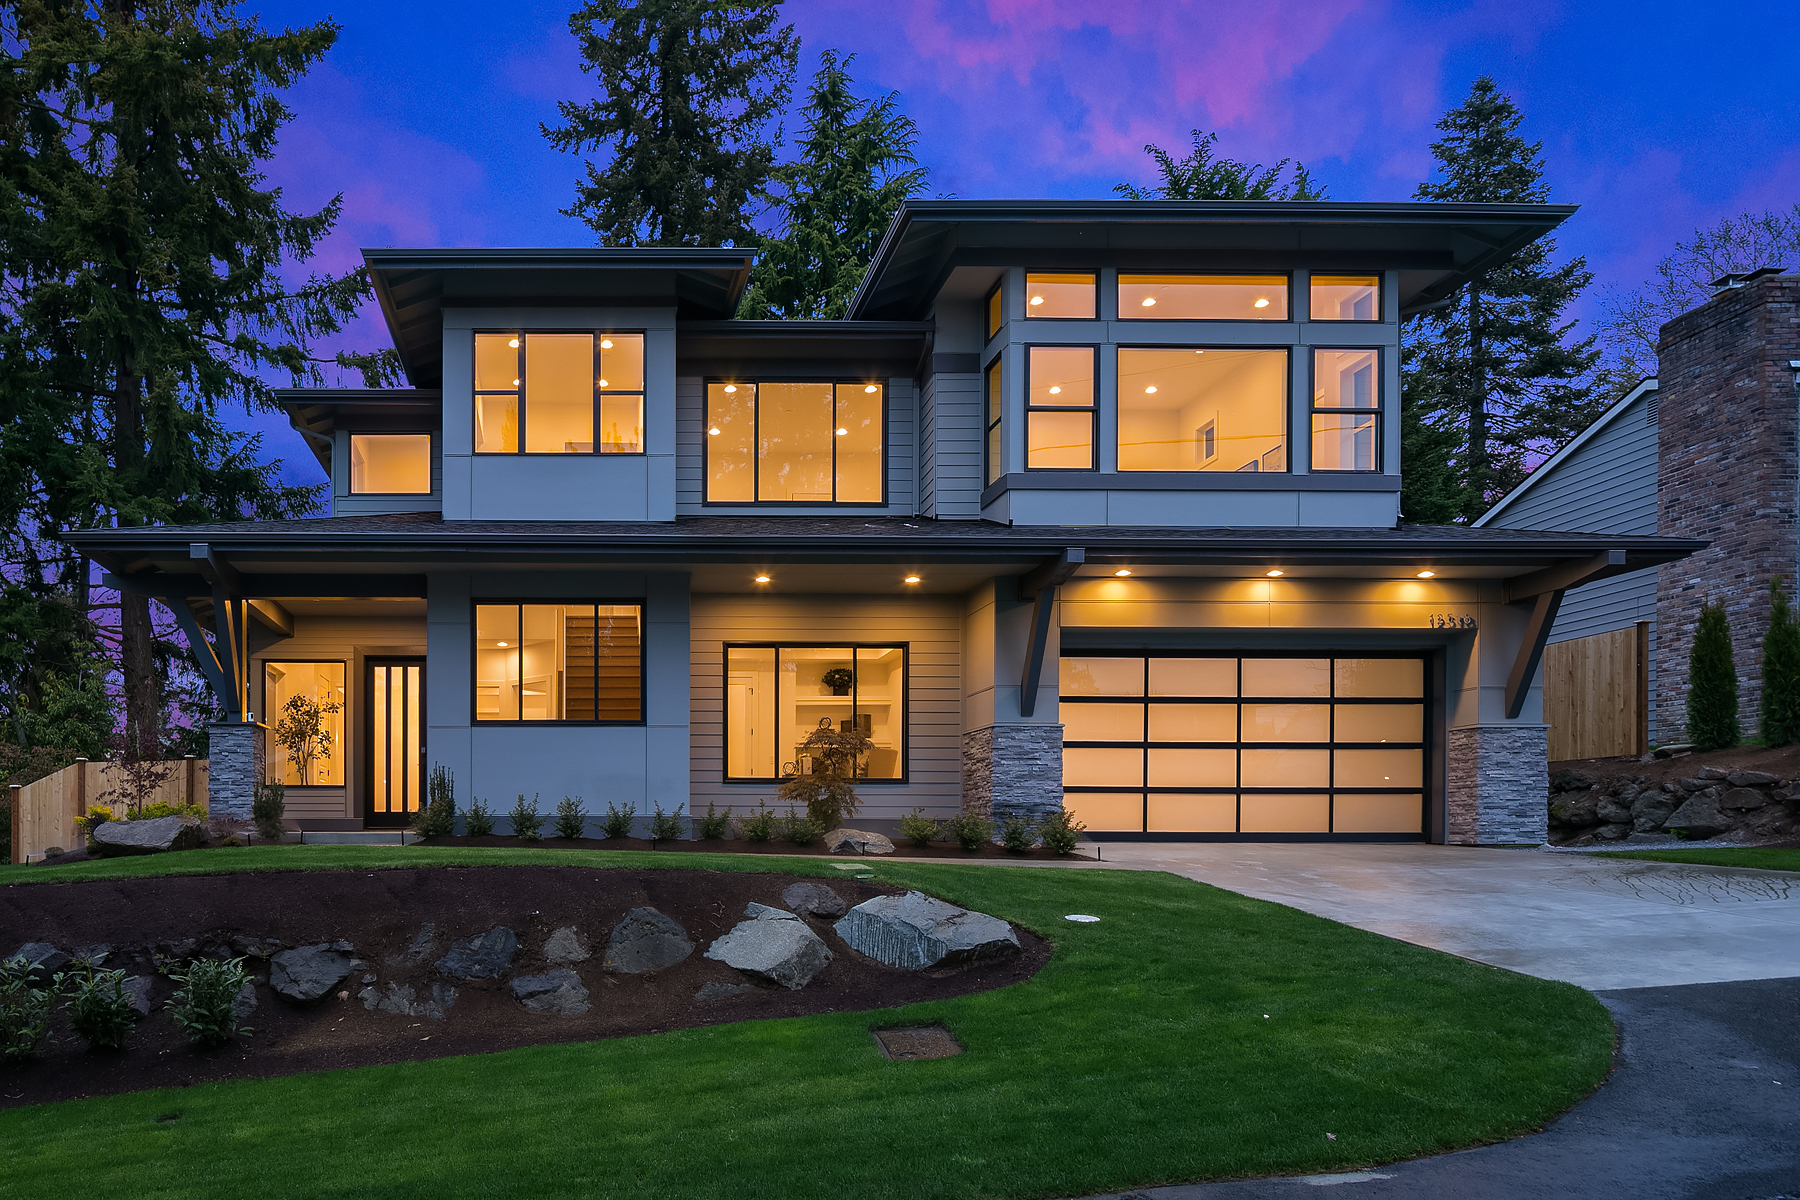 View our new luxury home construction on 12518 SE 61st St, in Bellevue, WA from MN Custom Homes